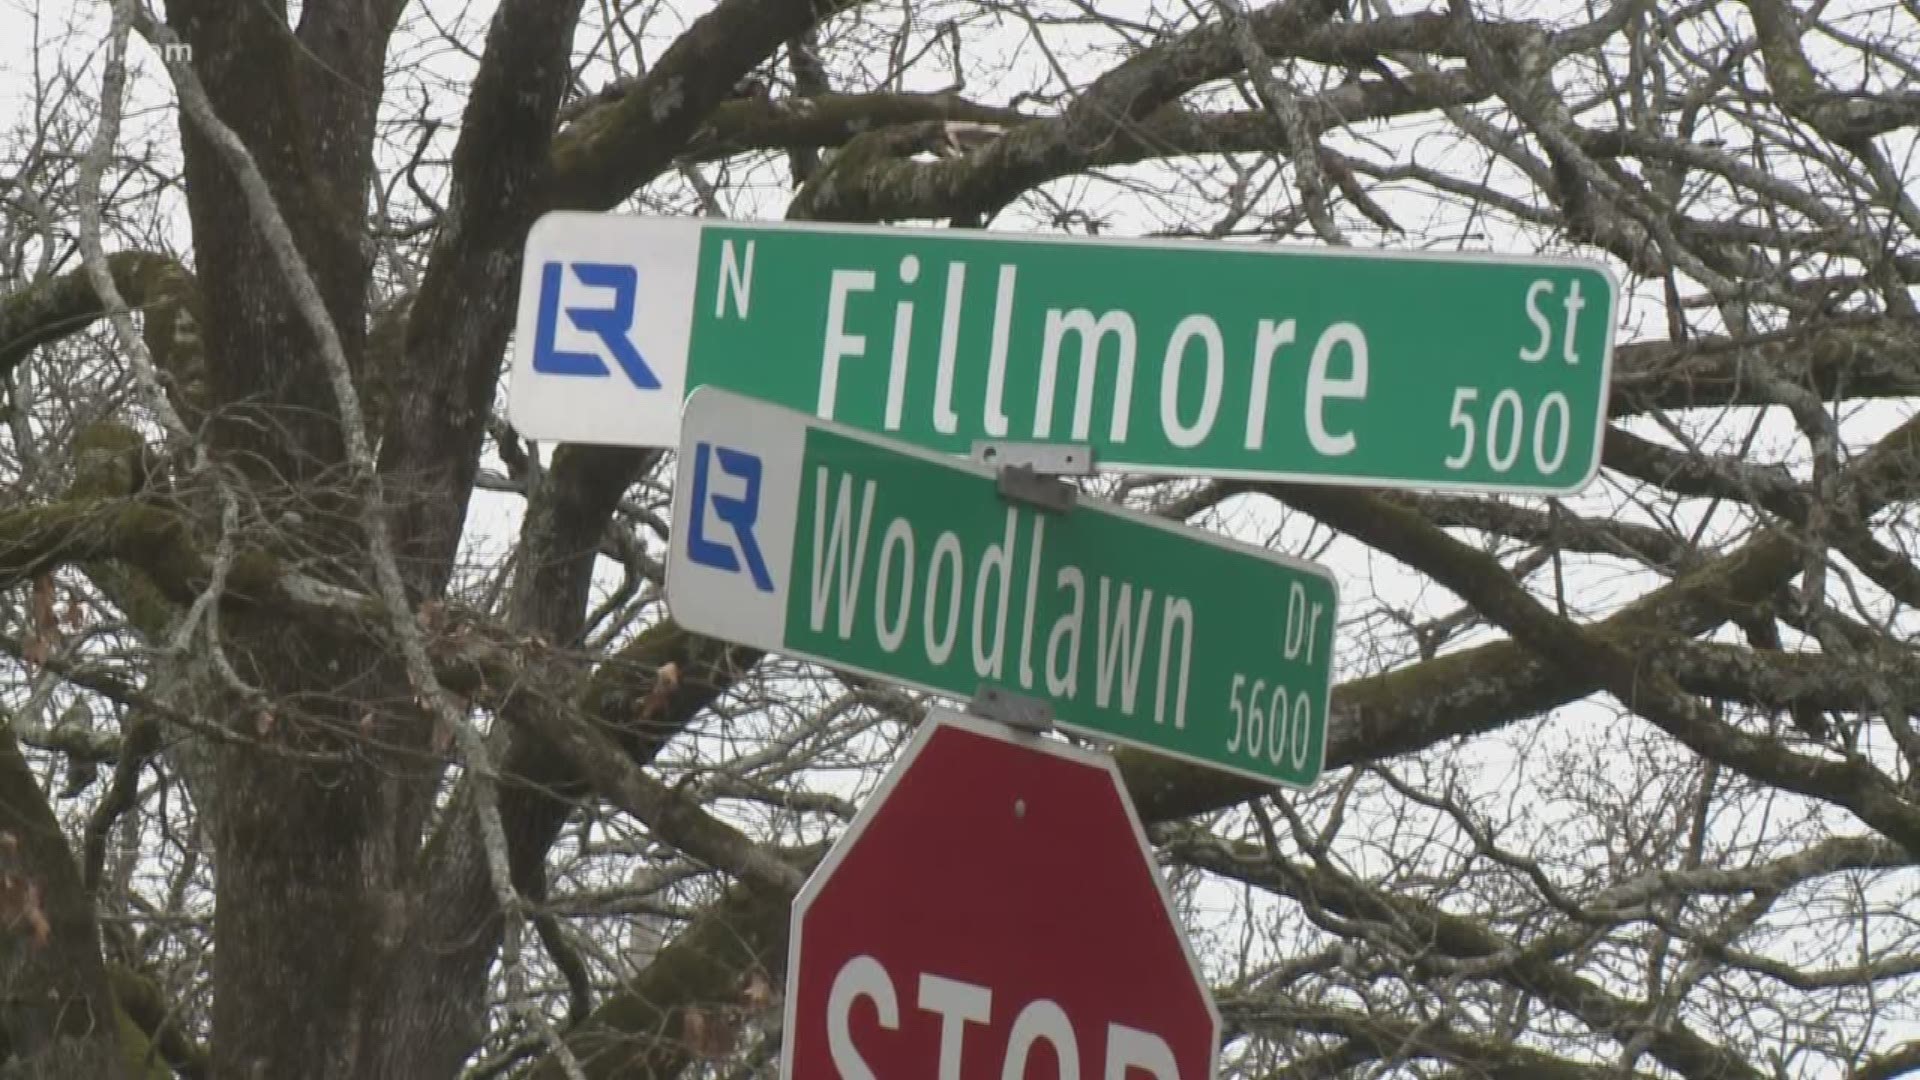 Police have ruled yesterday's suspicious death in Hillcrest a homicide, and they have a suspect in custody.